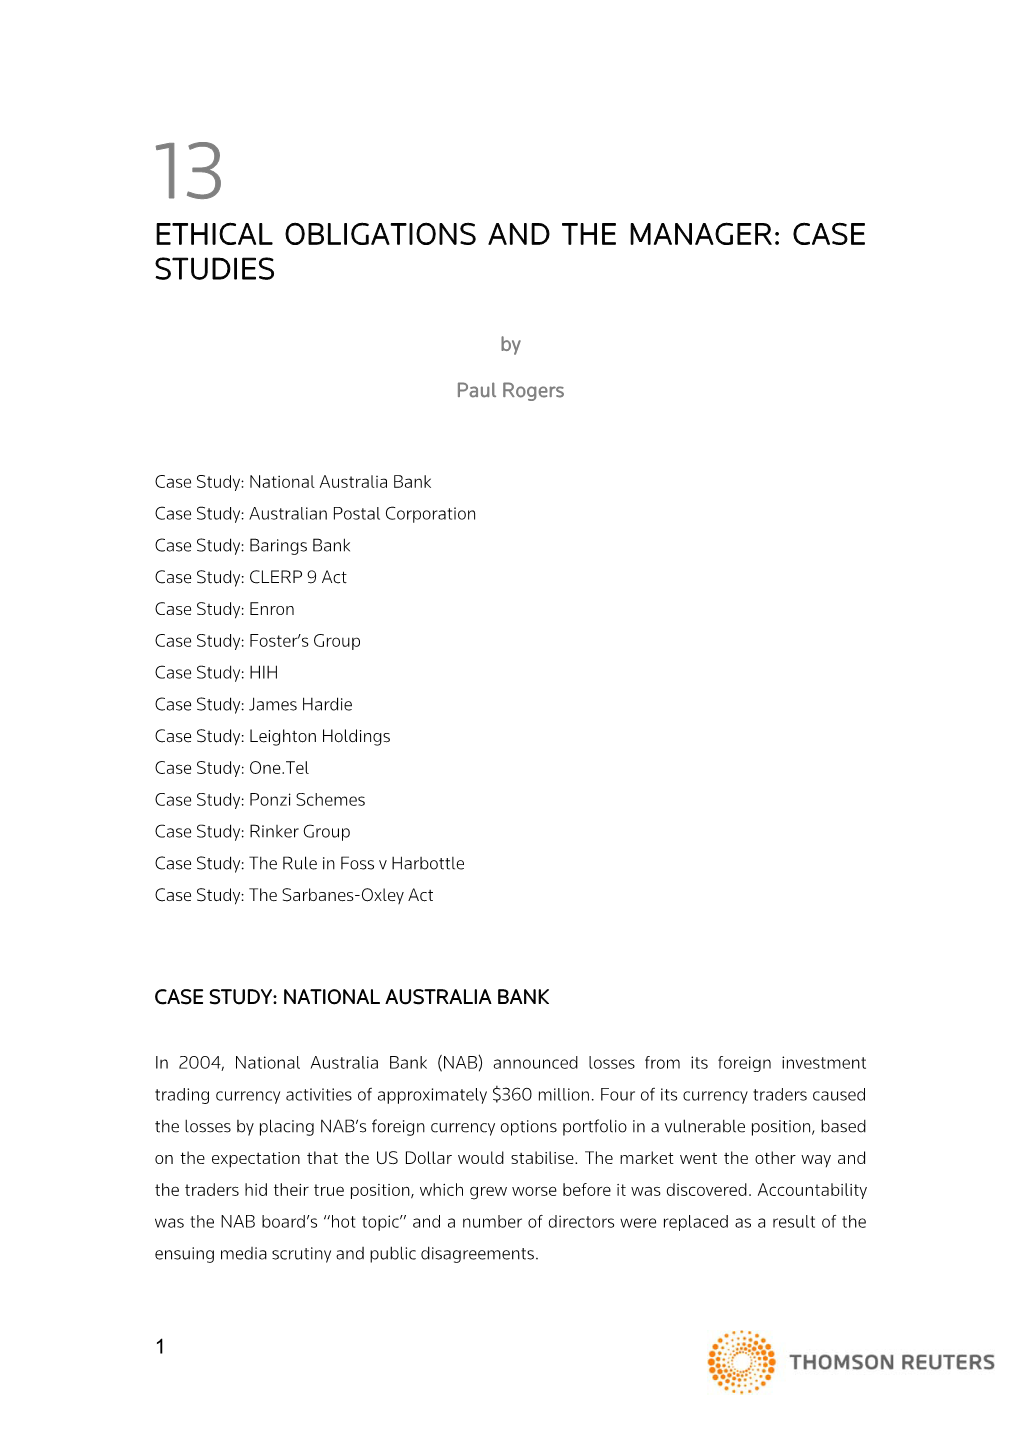 Ethical Obligations and the Manager: Case Studies